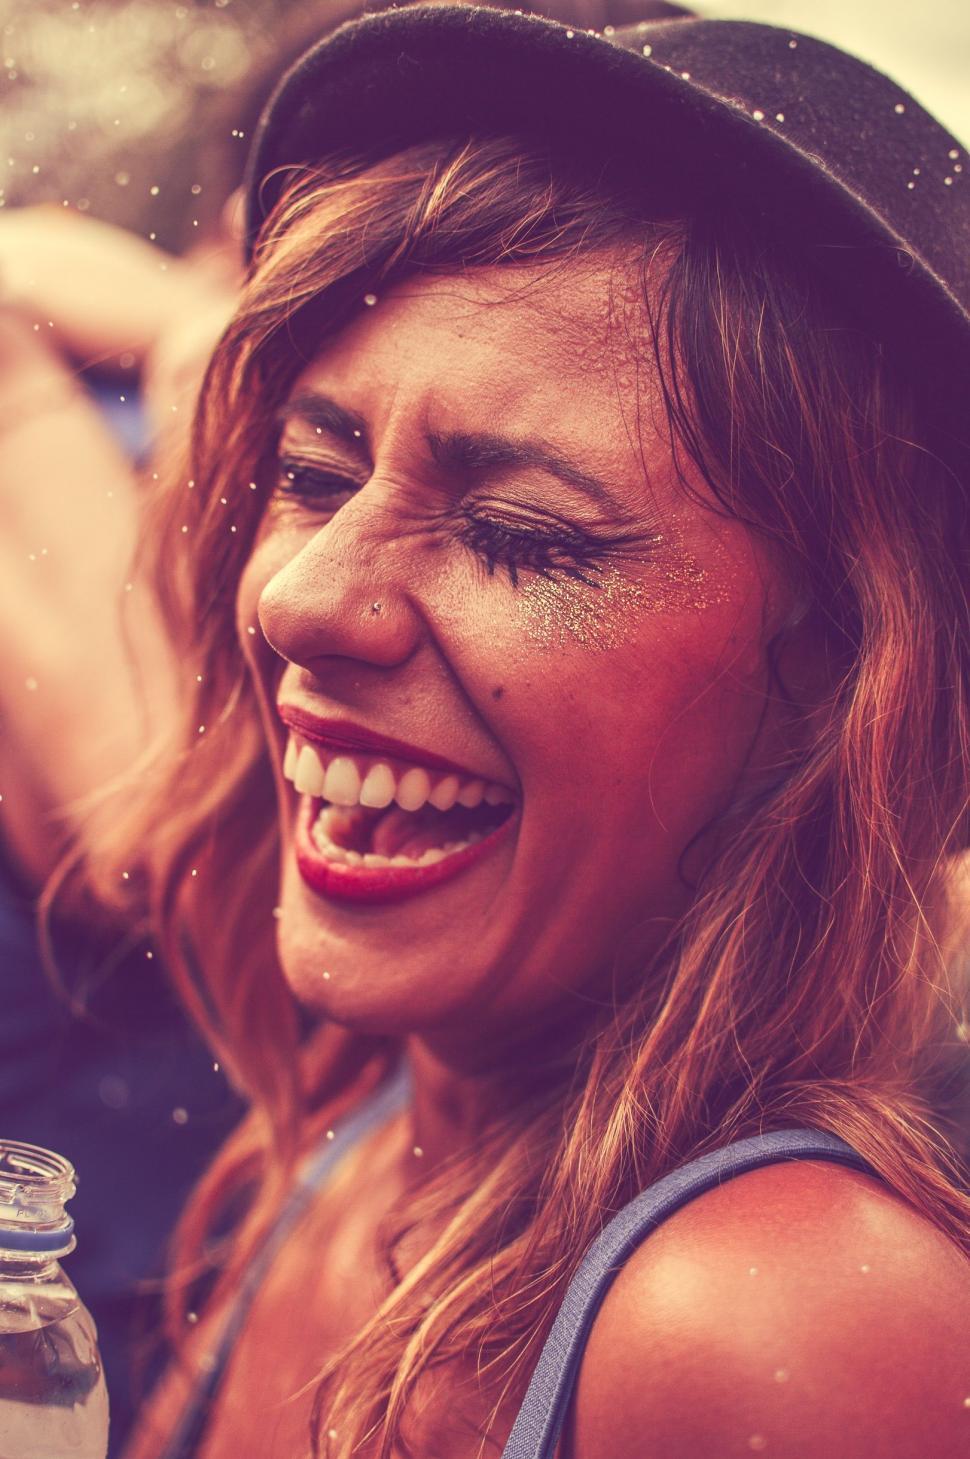 Free Image of Toothy Smile of Woman During a Carnival  